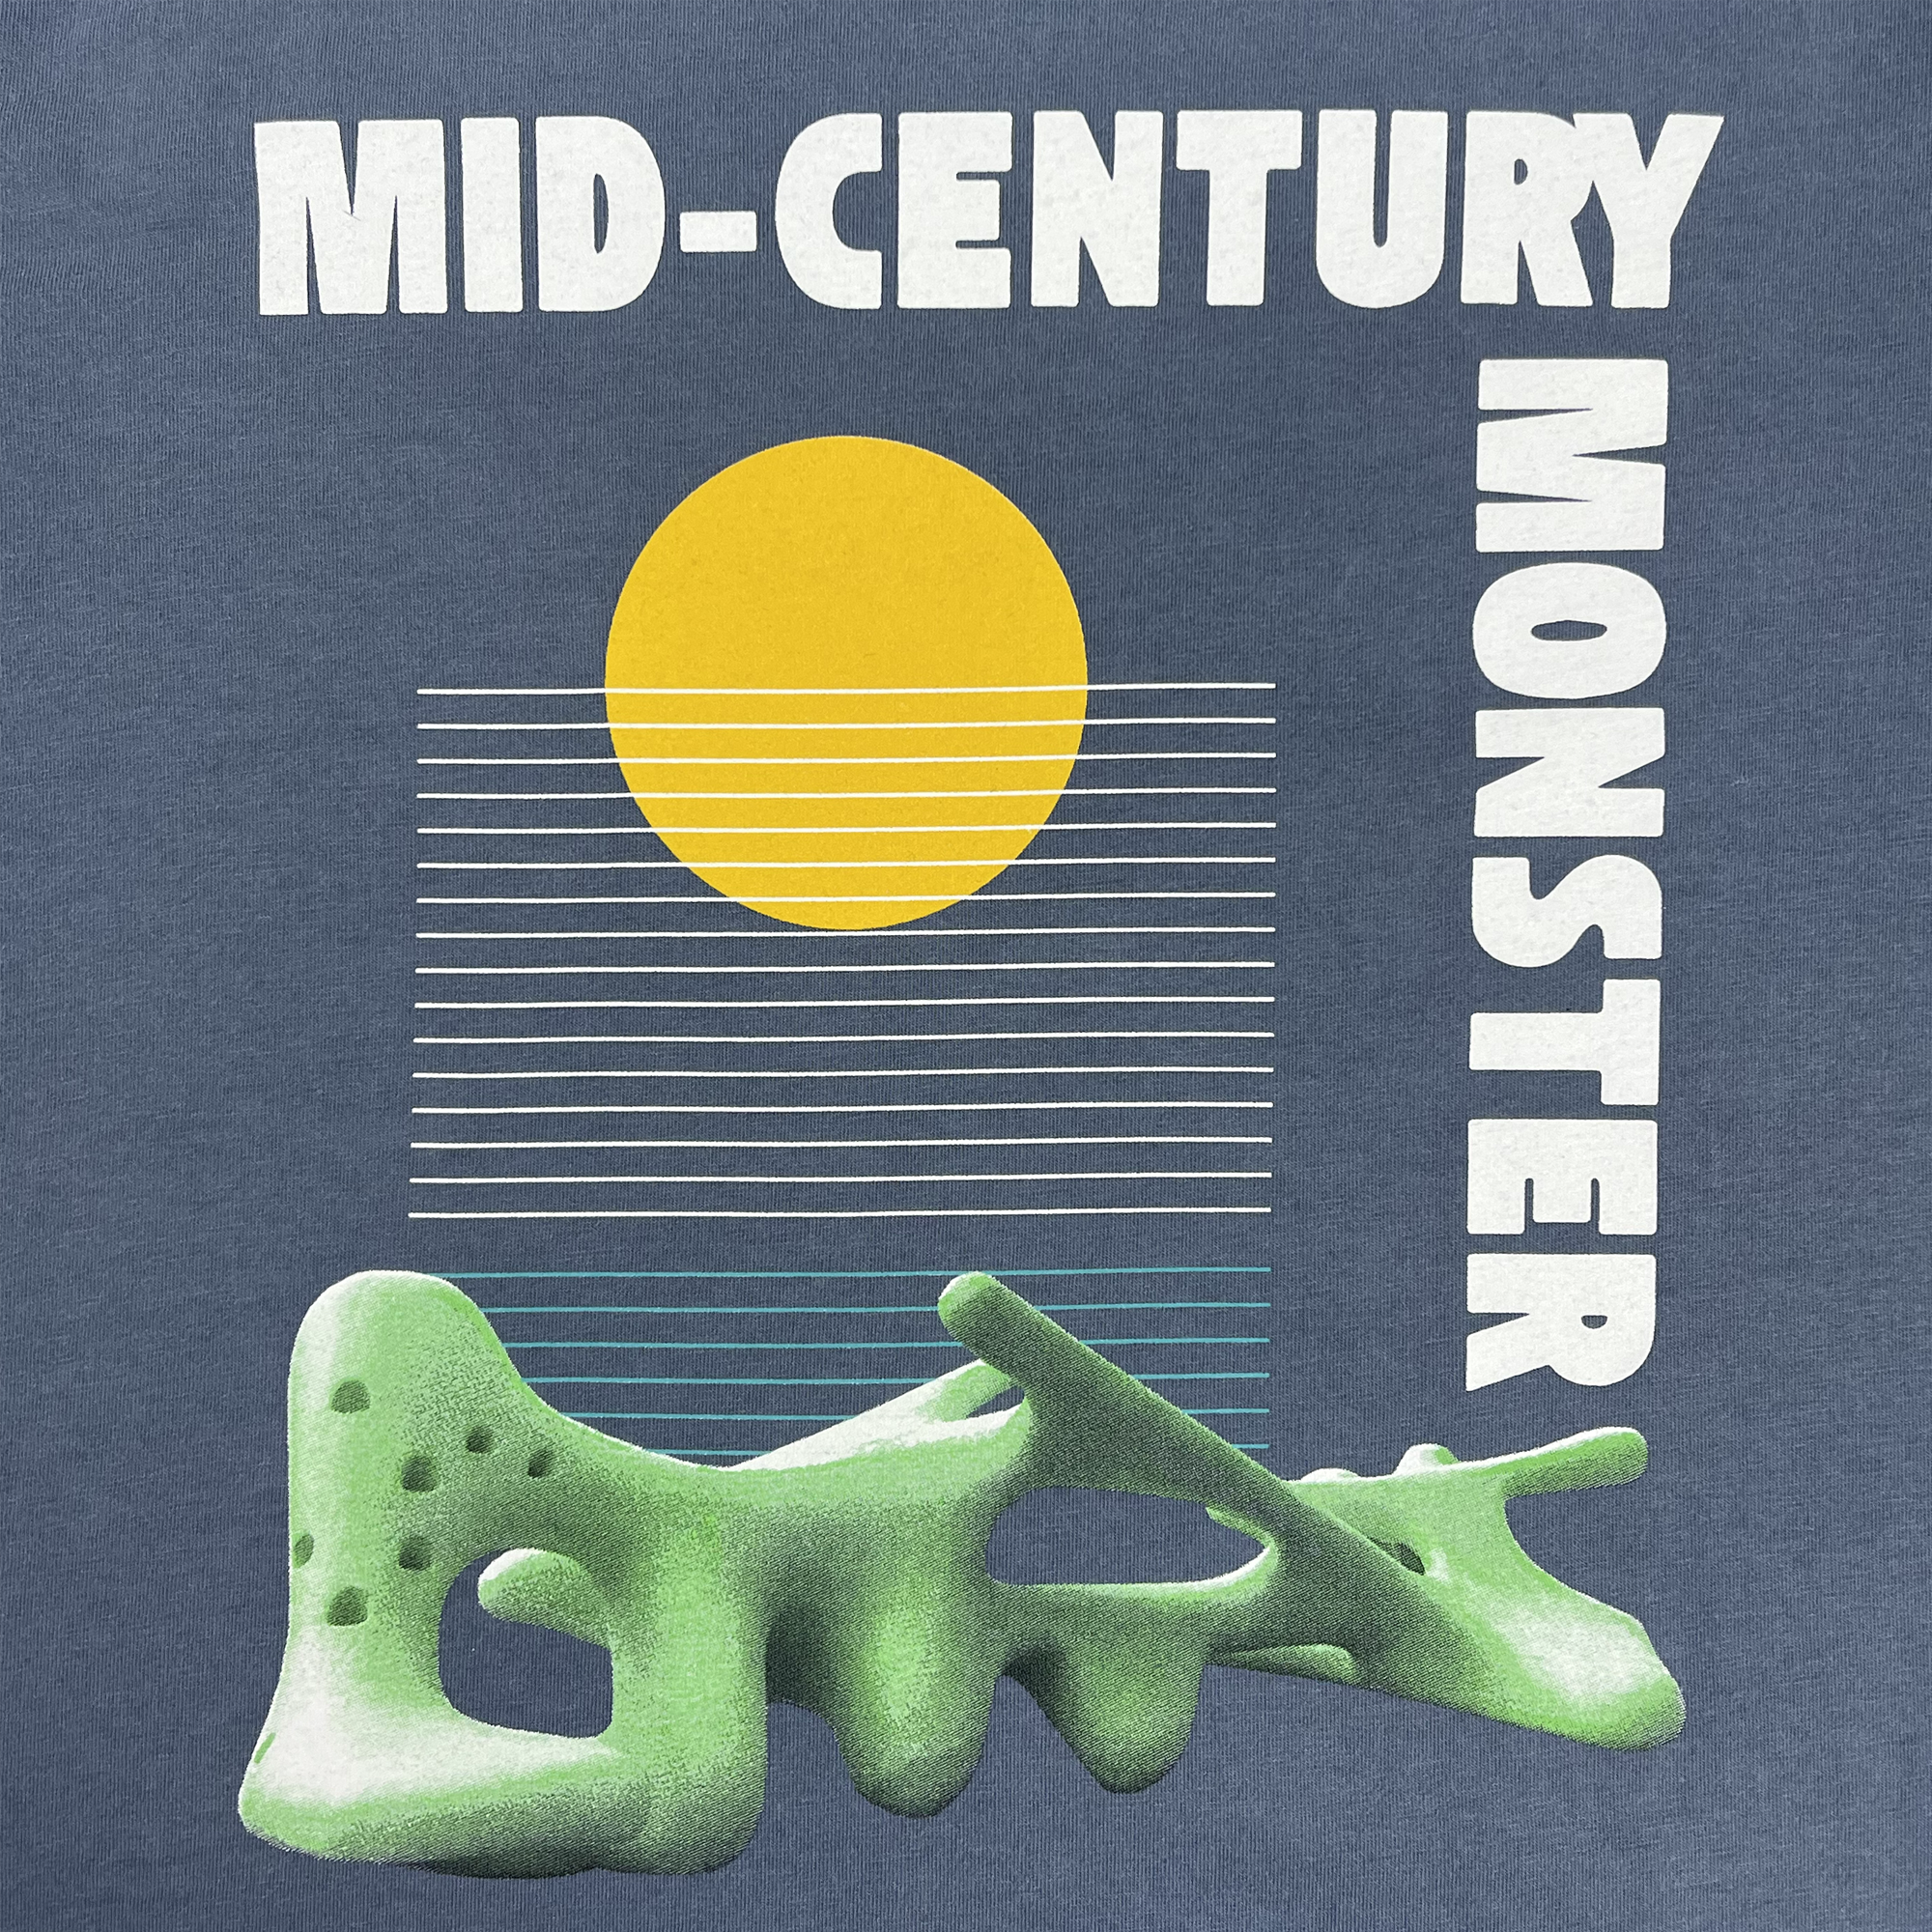 Detailed close-up of mid-century monster graphic from Oaklands Marci Iron Works on the front chest of a faded blue women’s t-shirt.